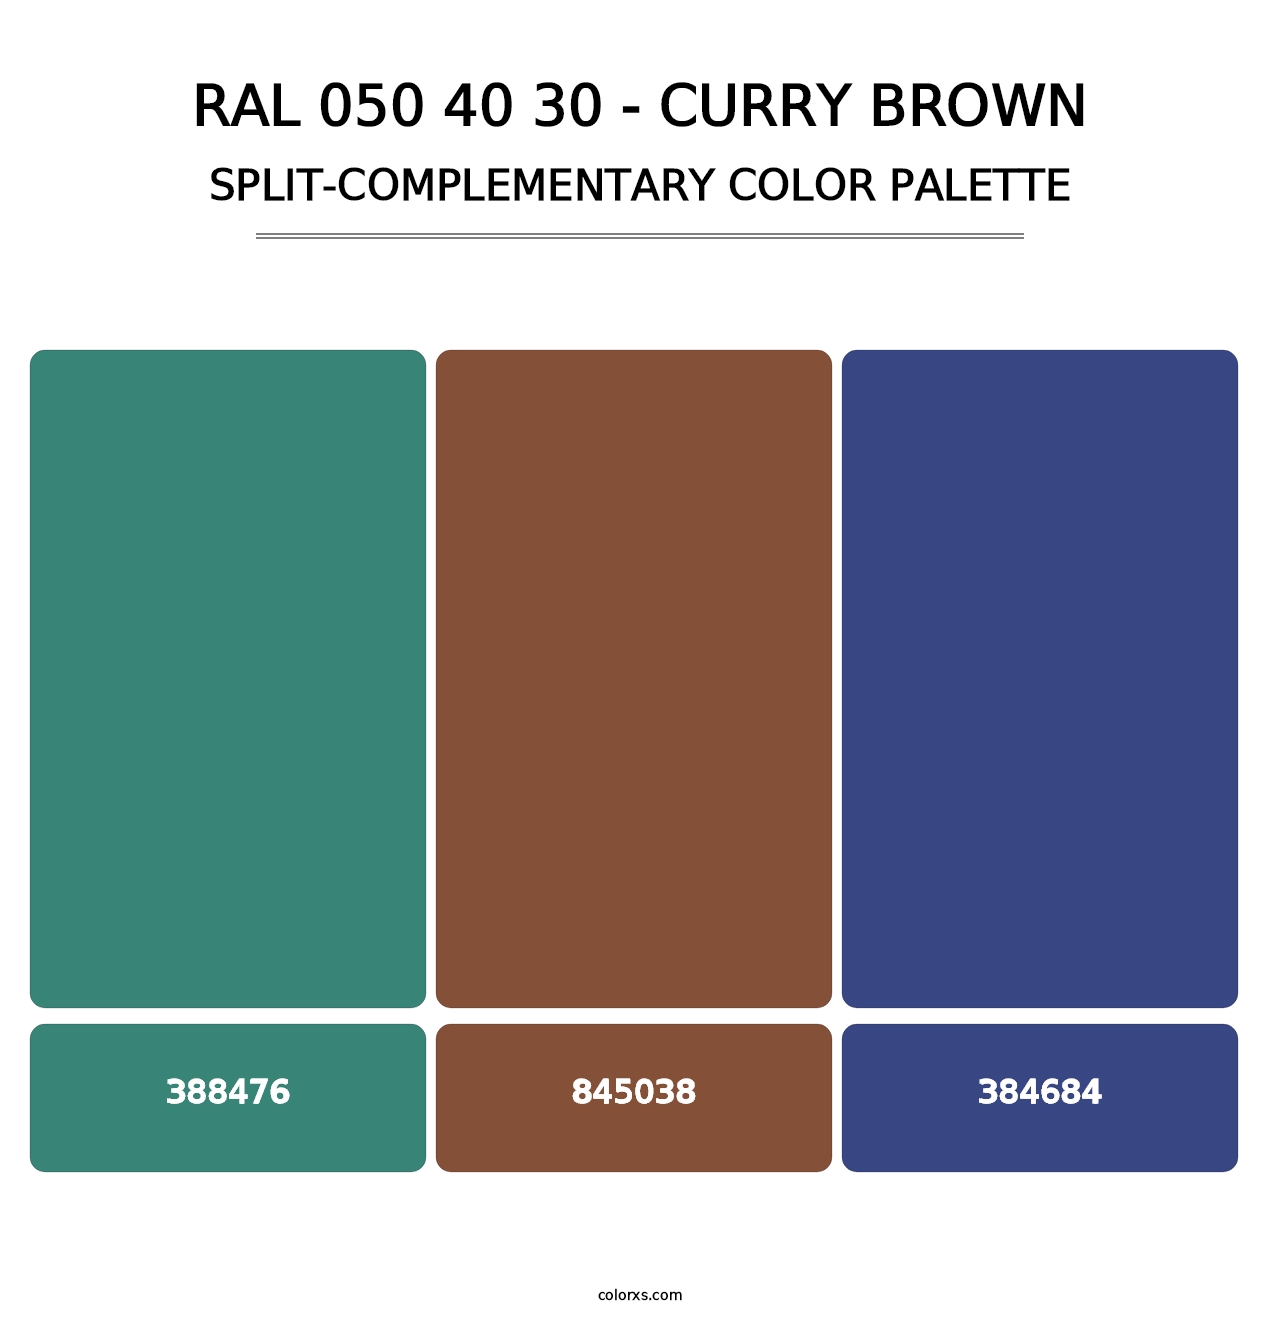 RAL 050 40 30 - Curry Brown - Split-Complementary Color Palette